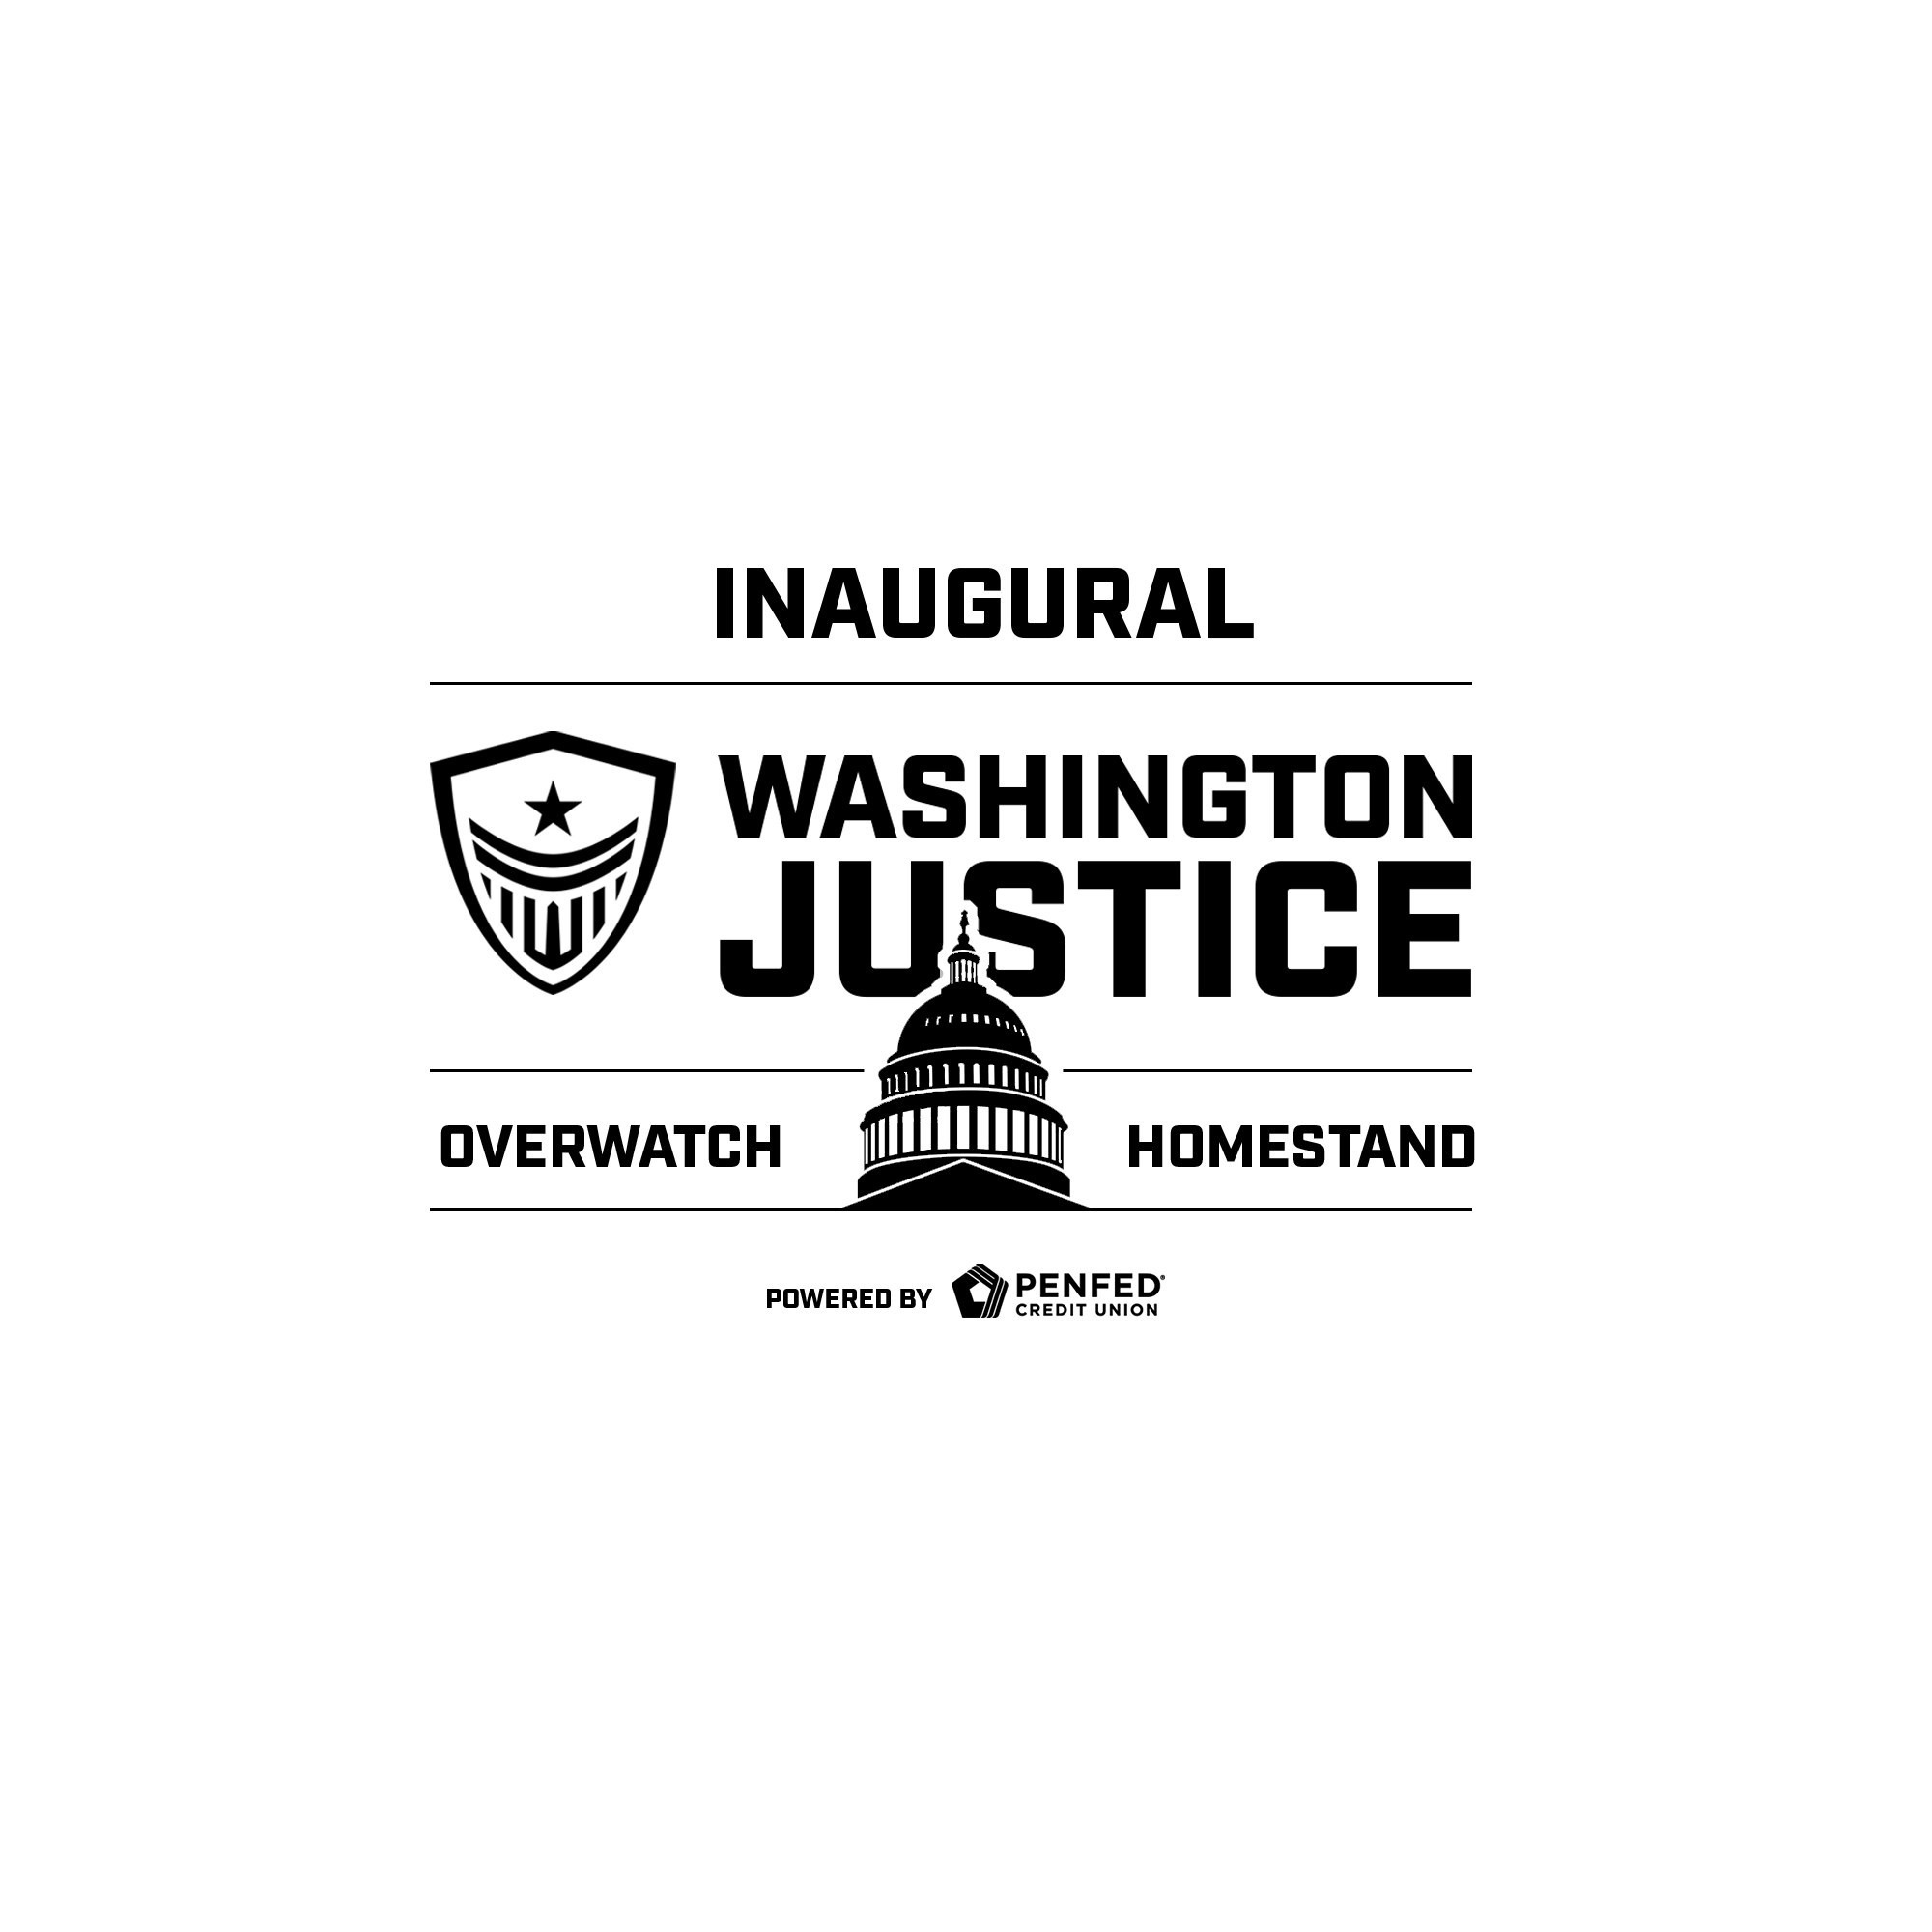 The Washington Justice Partners with PenFed Credit Union for the 2020 Season and to Present its Inaugural Homestand Weekend on February 22-23